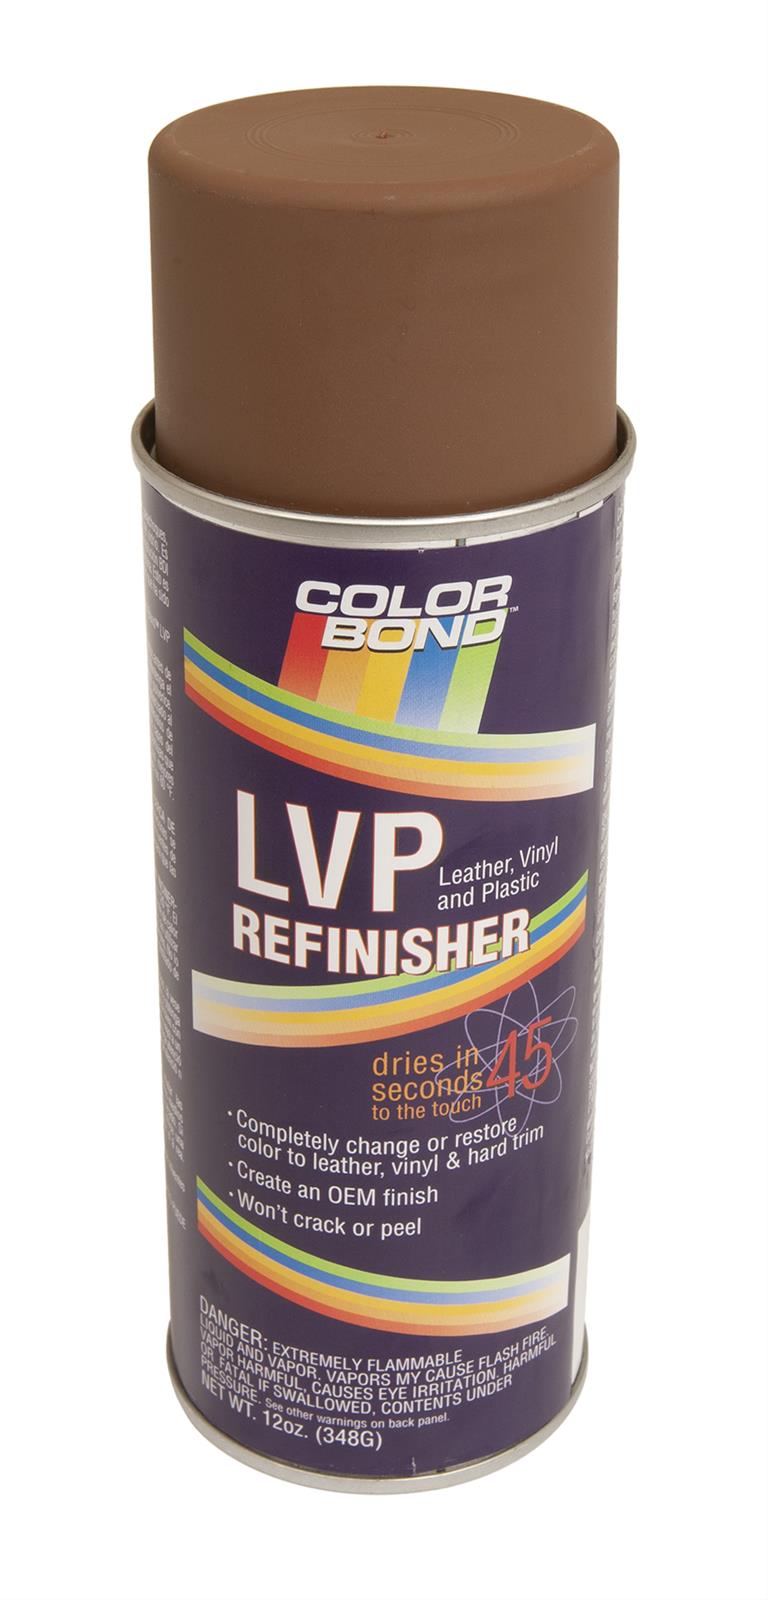 Colorbond 3180 Colorbond Leather, Plastic, and Vinyl Refinisher